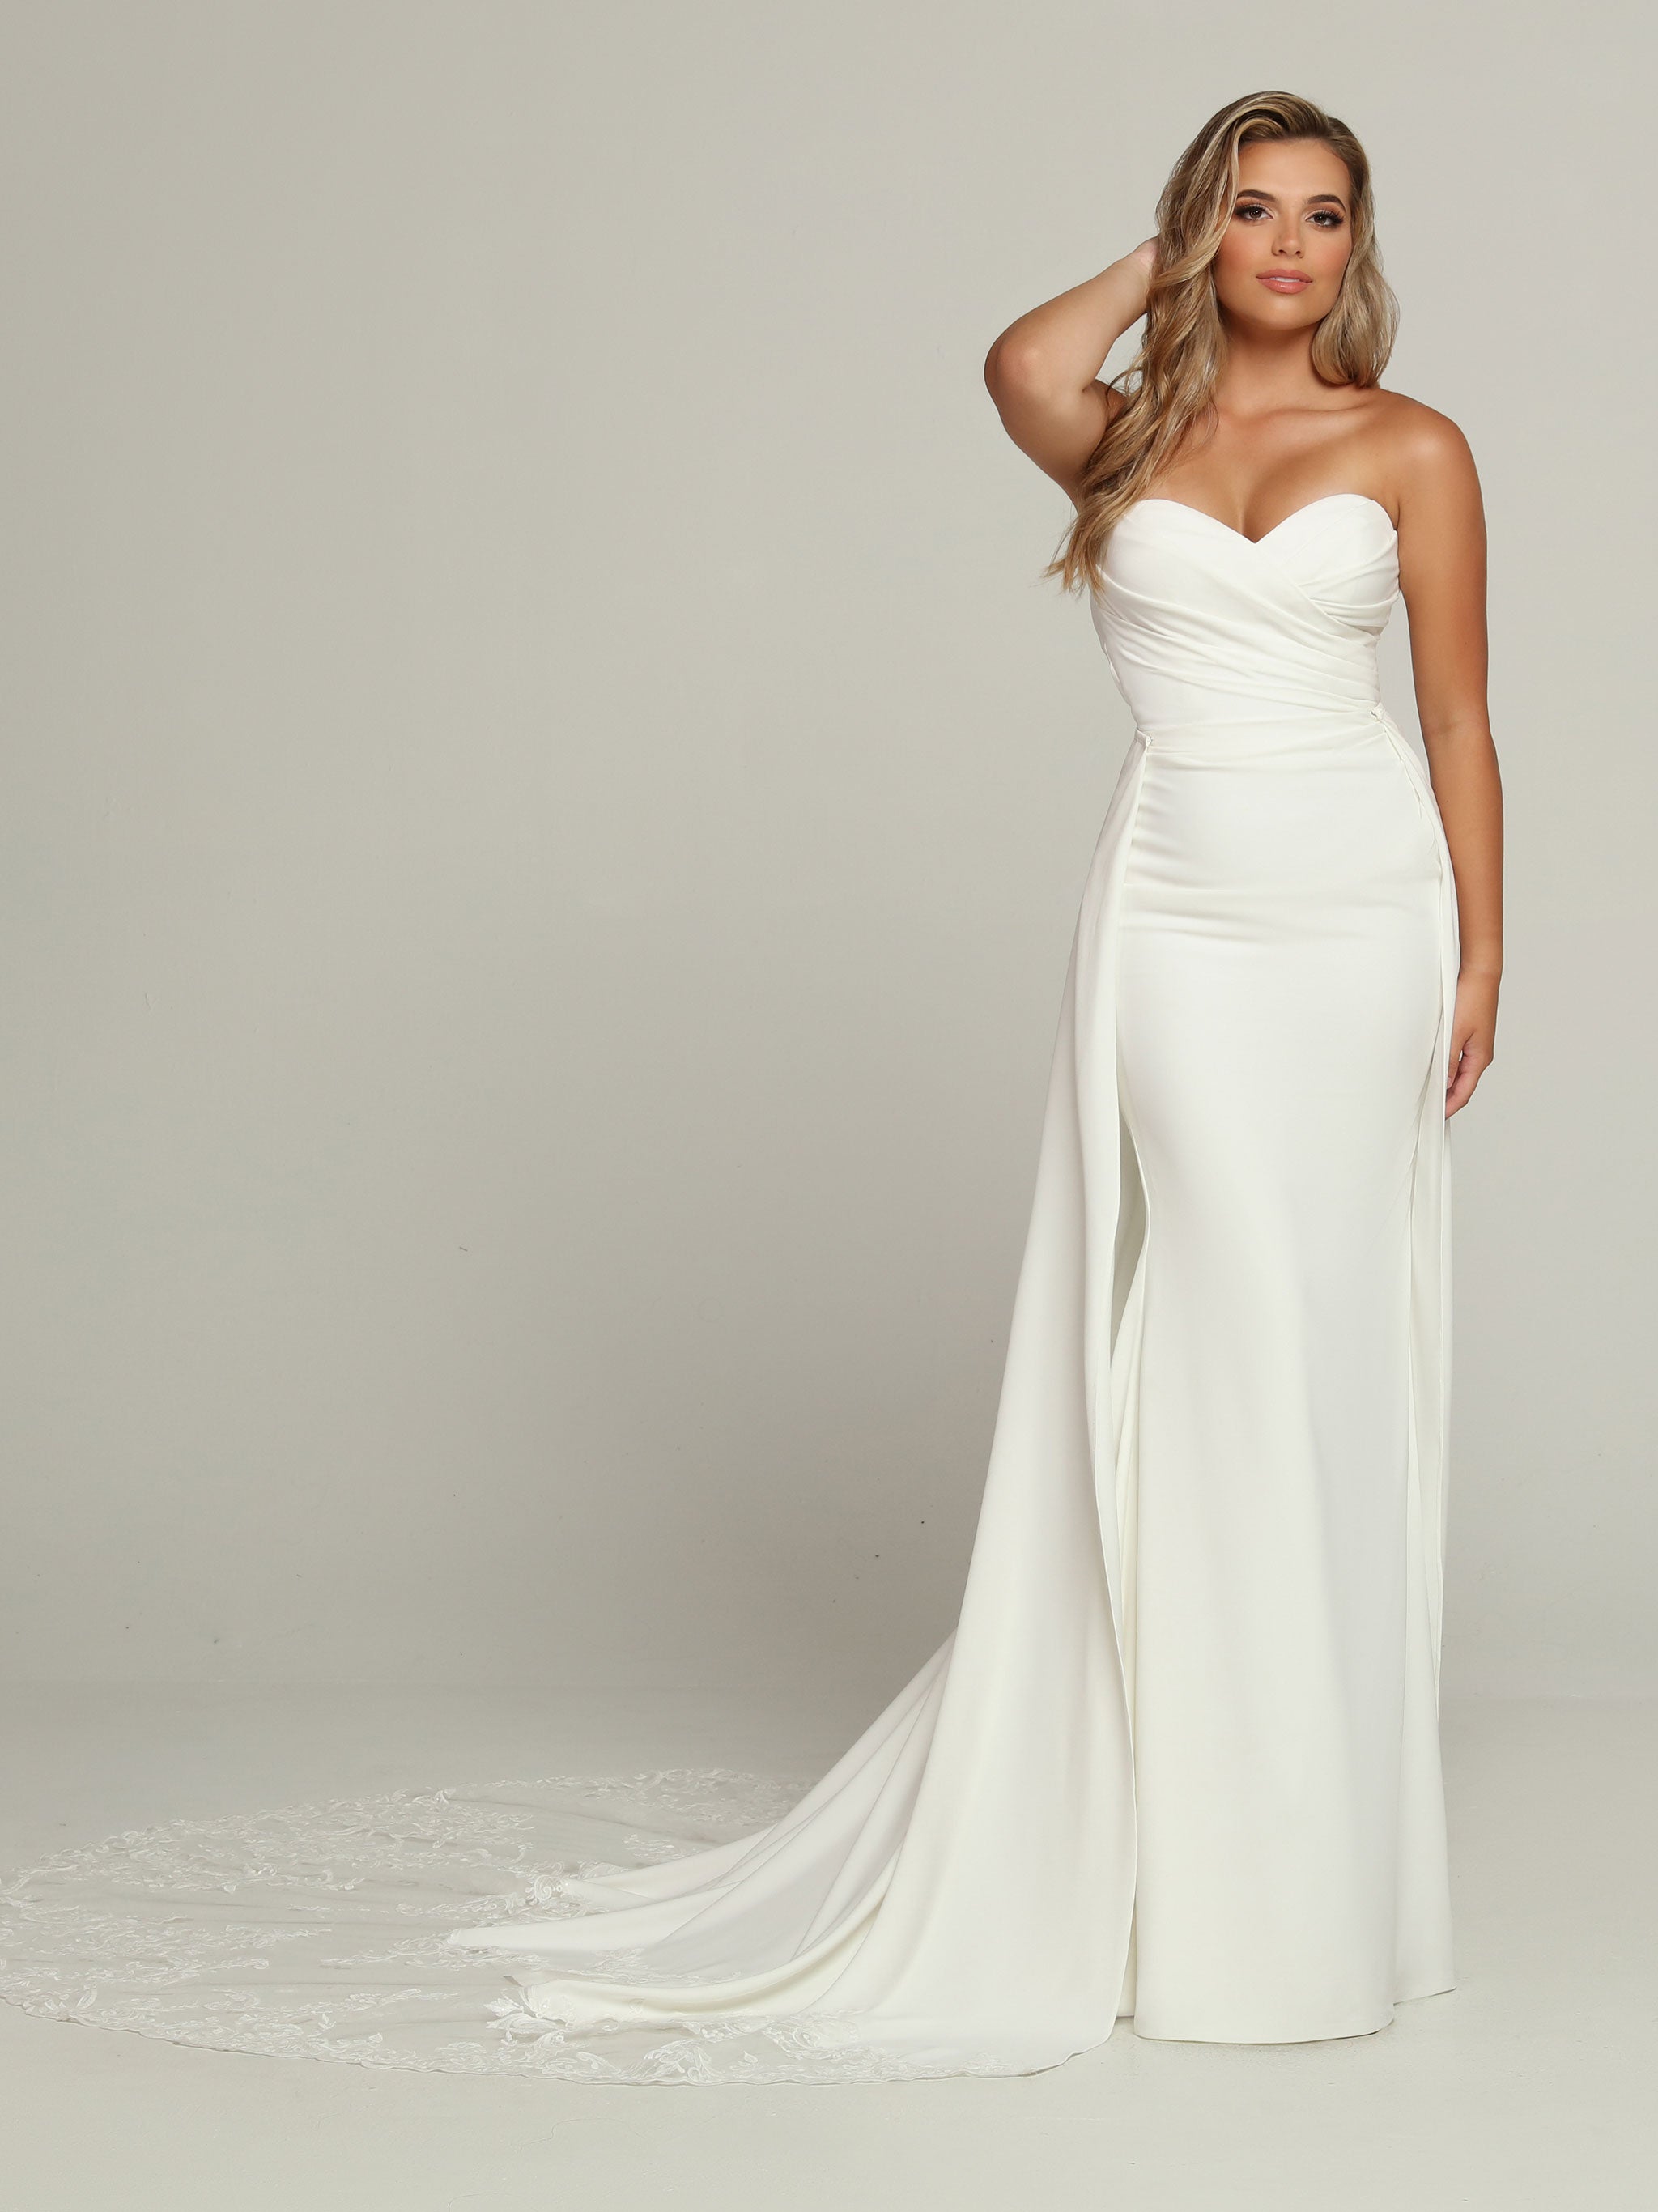 White Satin Bridal Gowns, Simple A-line Wedding Dresses, Sleeveless We –  ClaireBridal